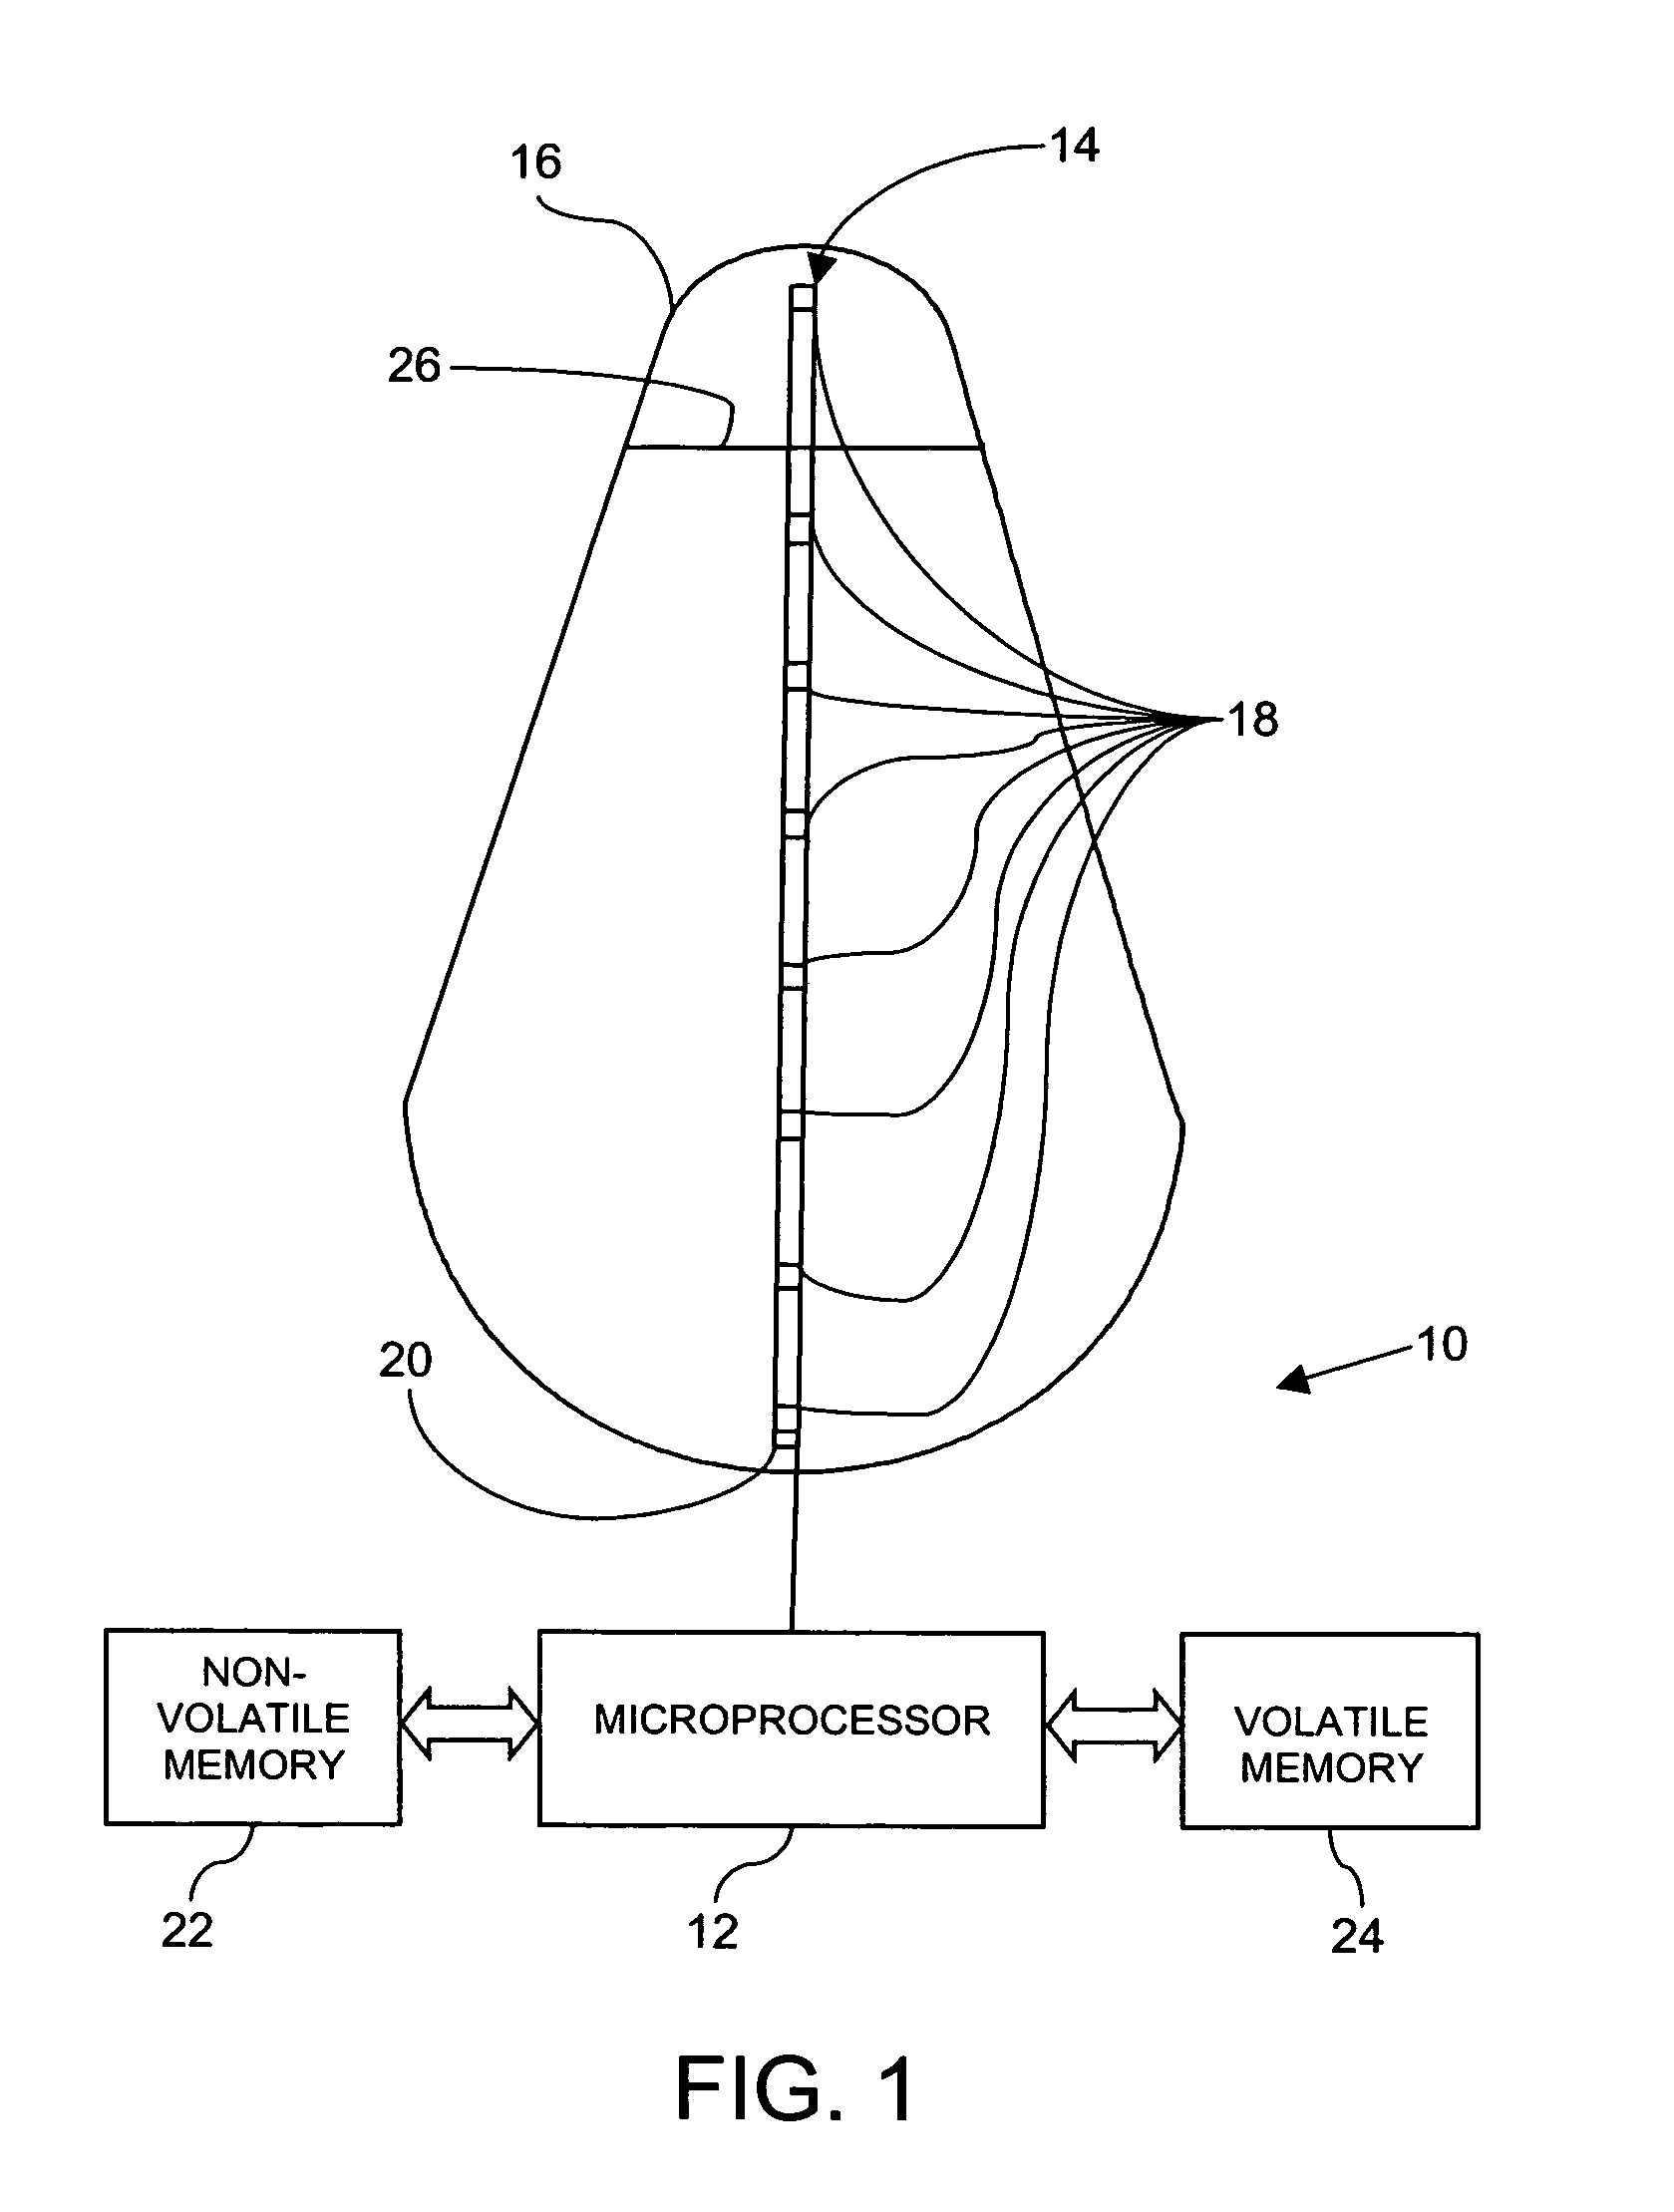 Method and apparatus for detecting the level of a liquid